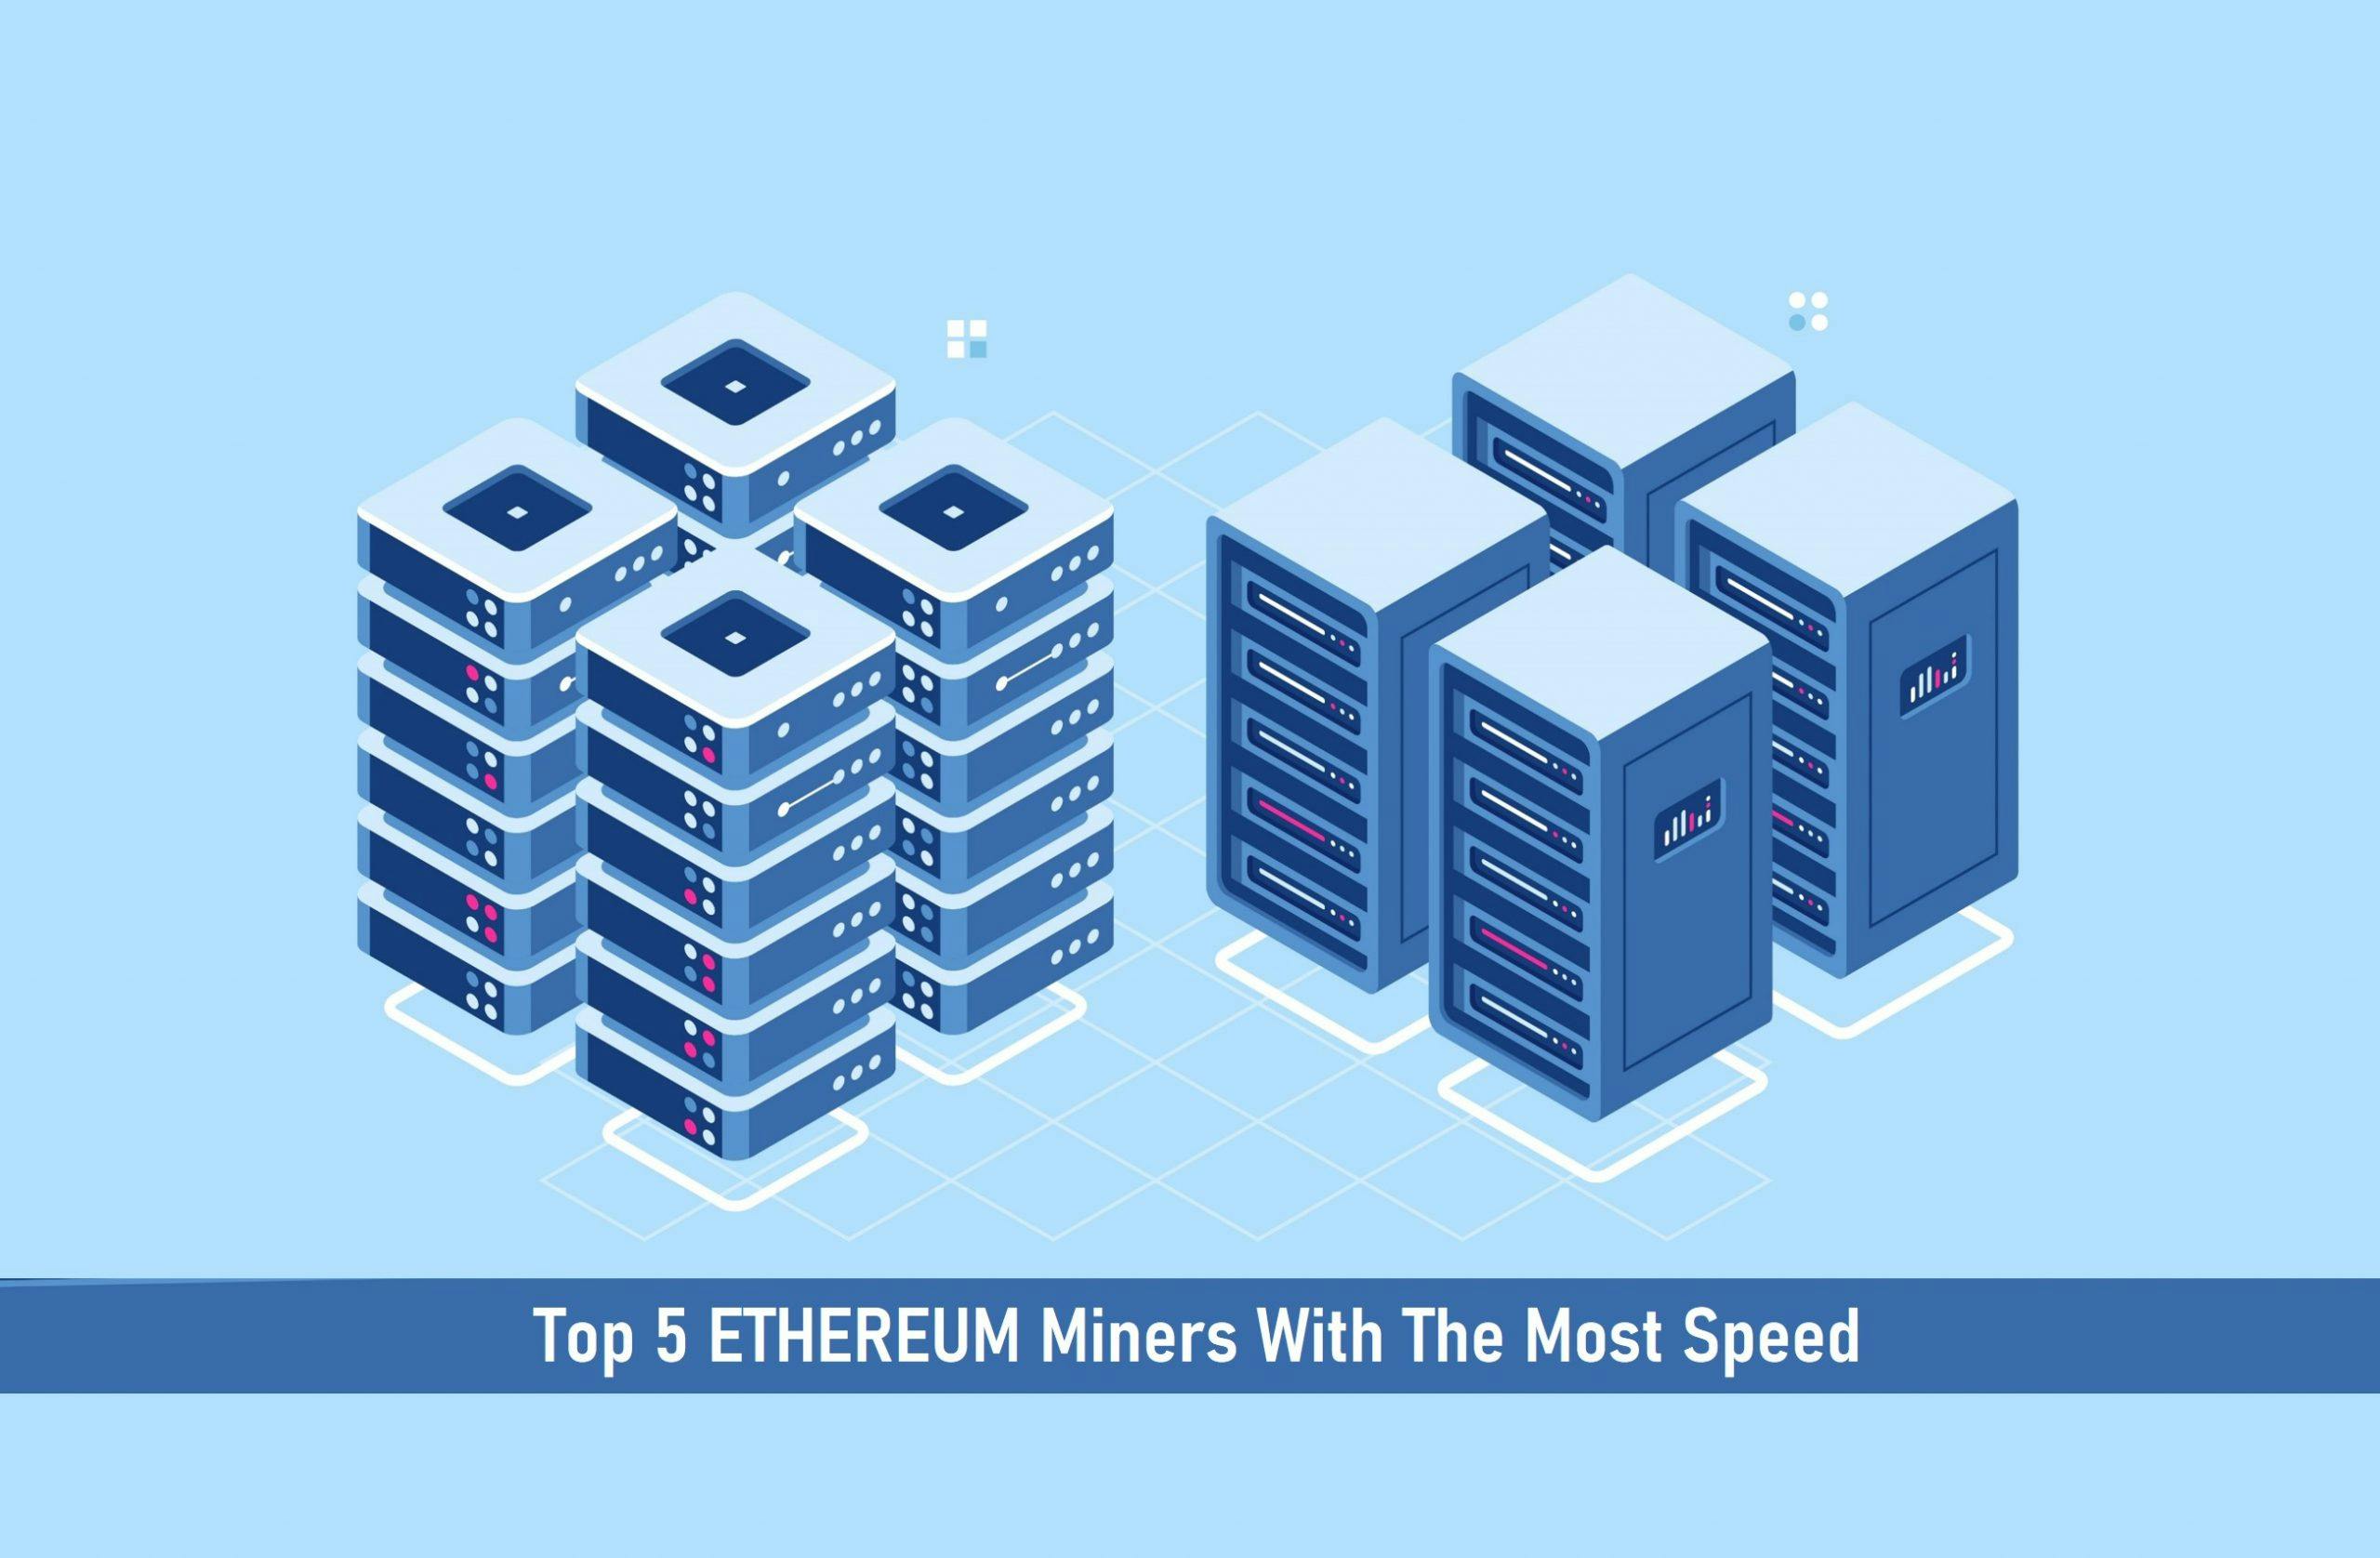 Top 5 Ethereum Miners With the Most Speed